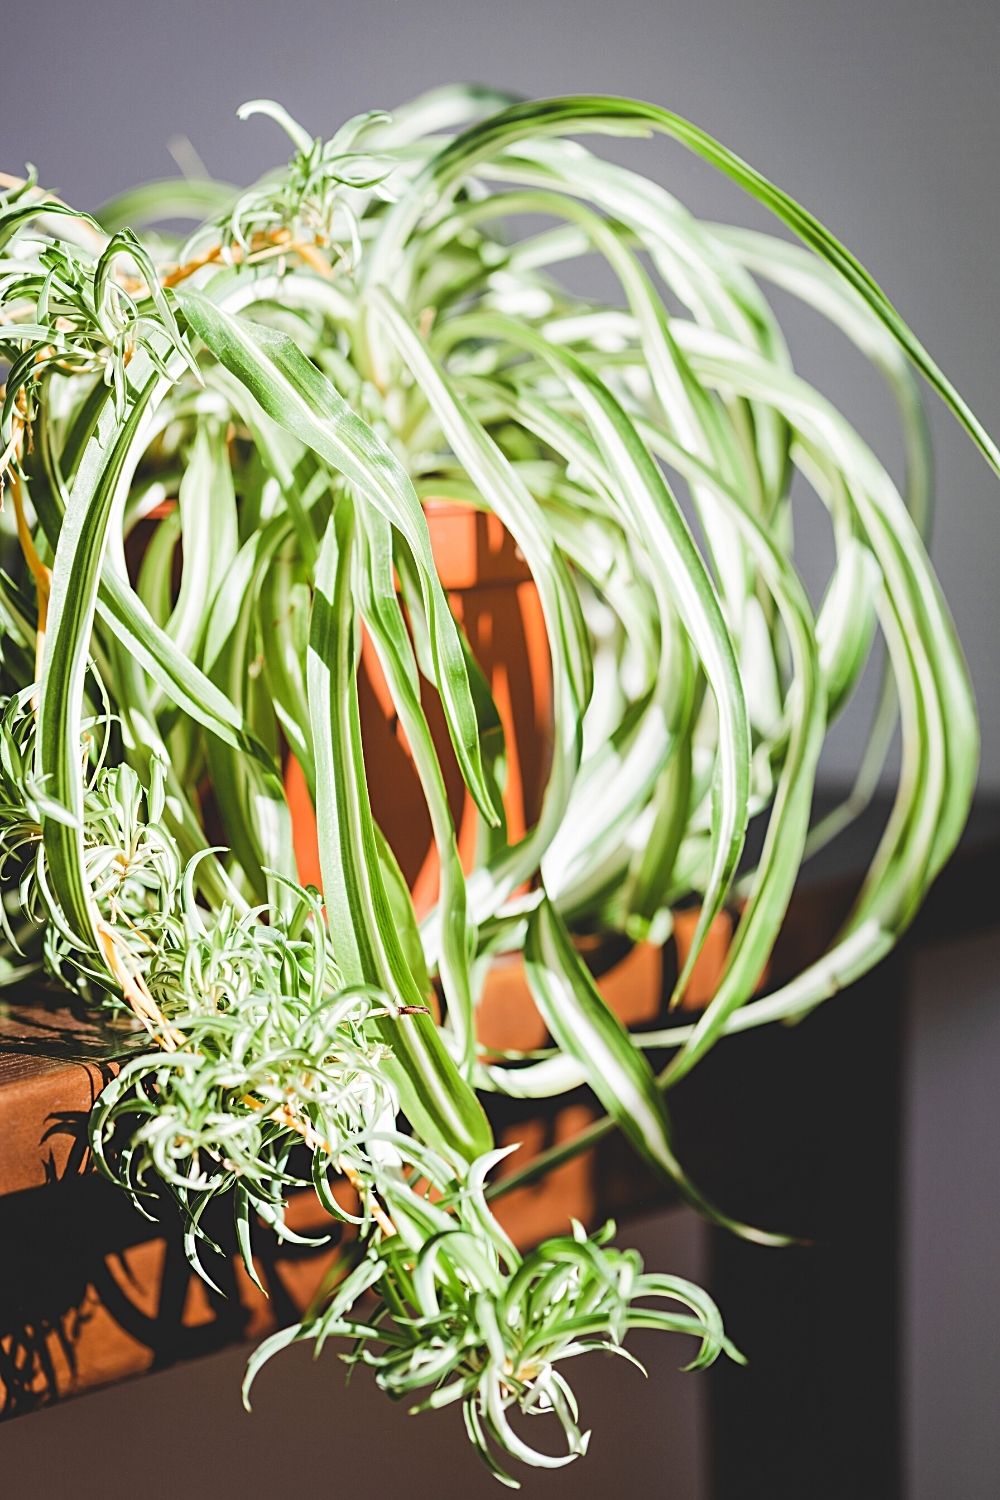 Spider plant, aside from being a great plant for terrariums, helps in purifying the air in indoor spaces